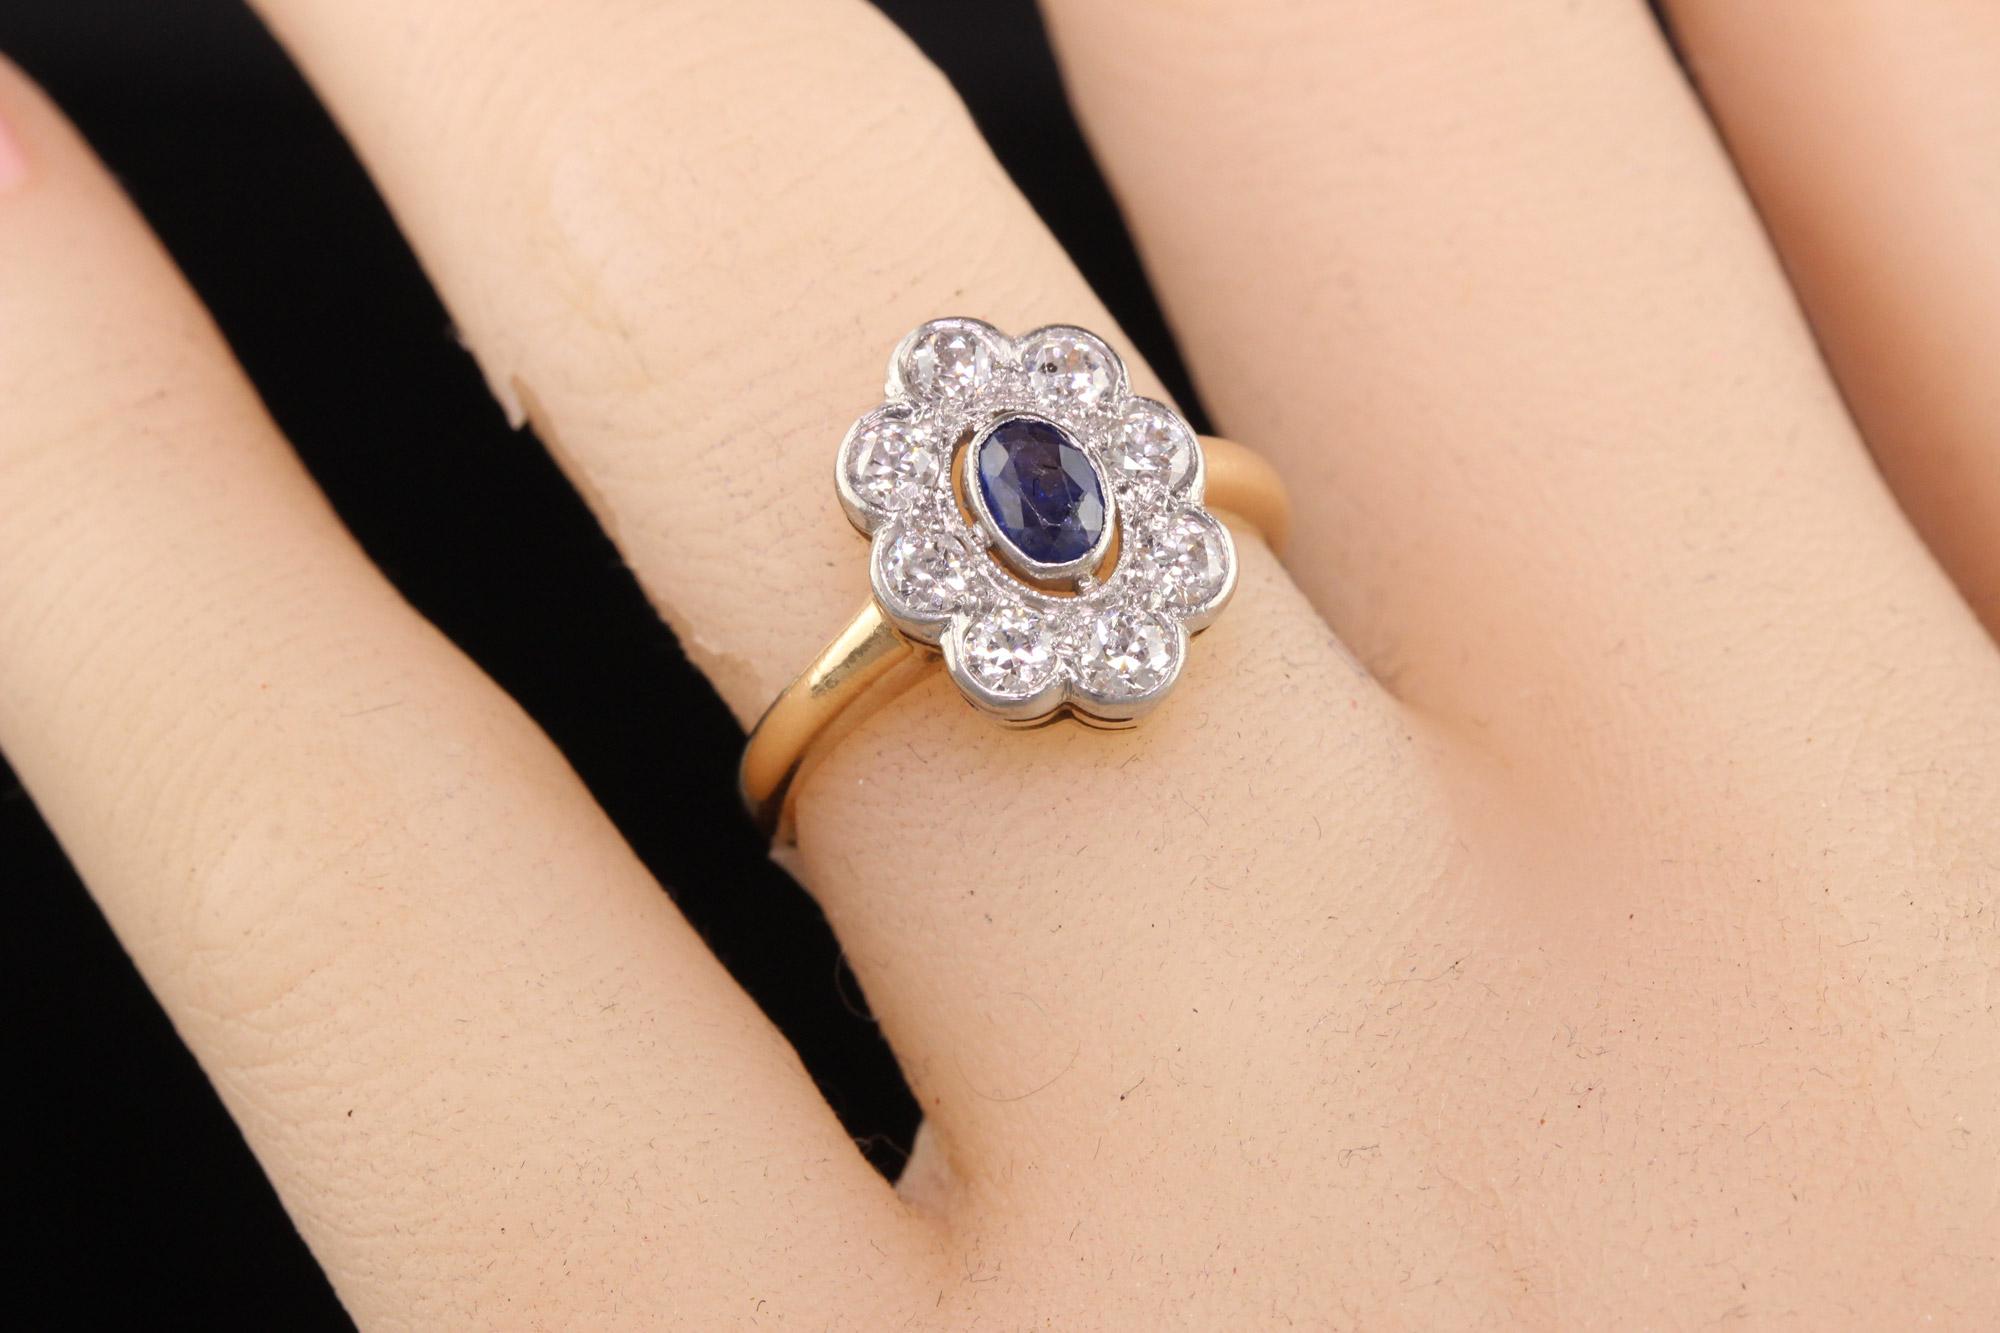 Antique Art Deco 14K Yellow Gold and Platinum Old Euro Diamond and Sapphire Ring For Sale 2